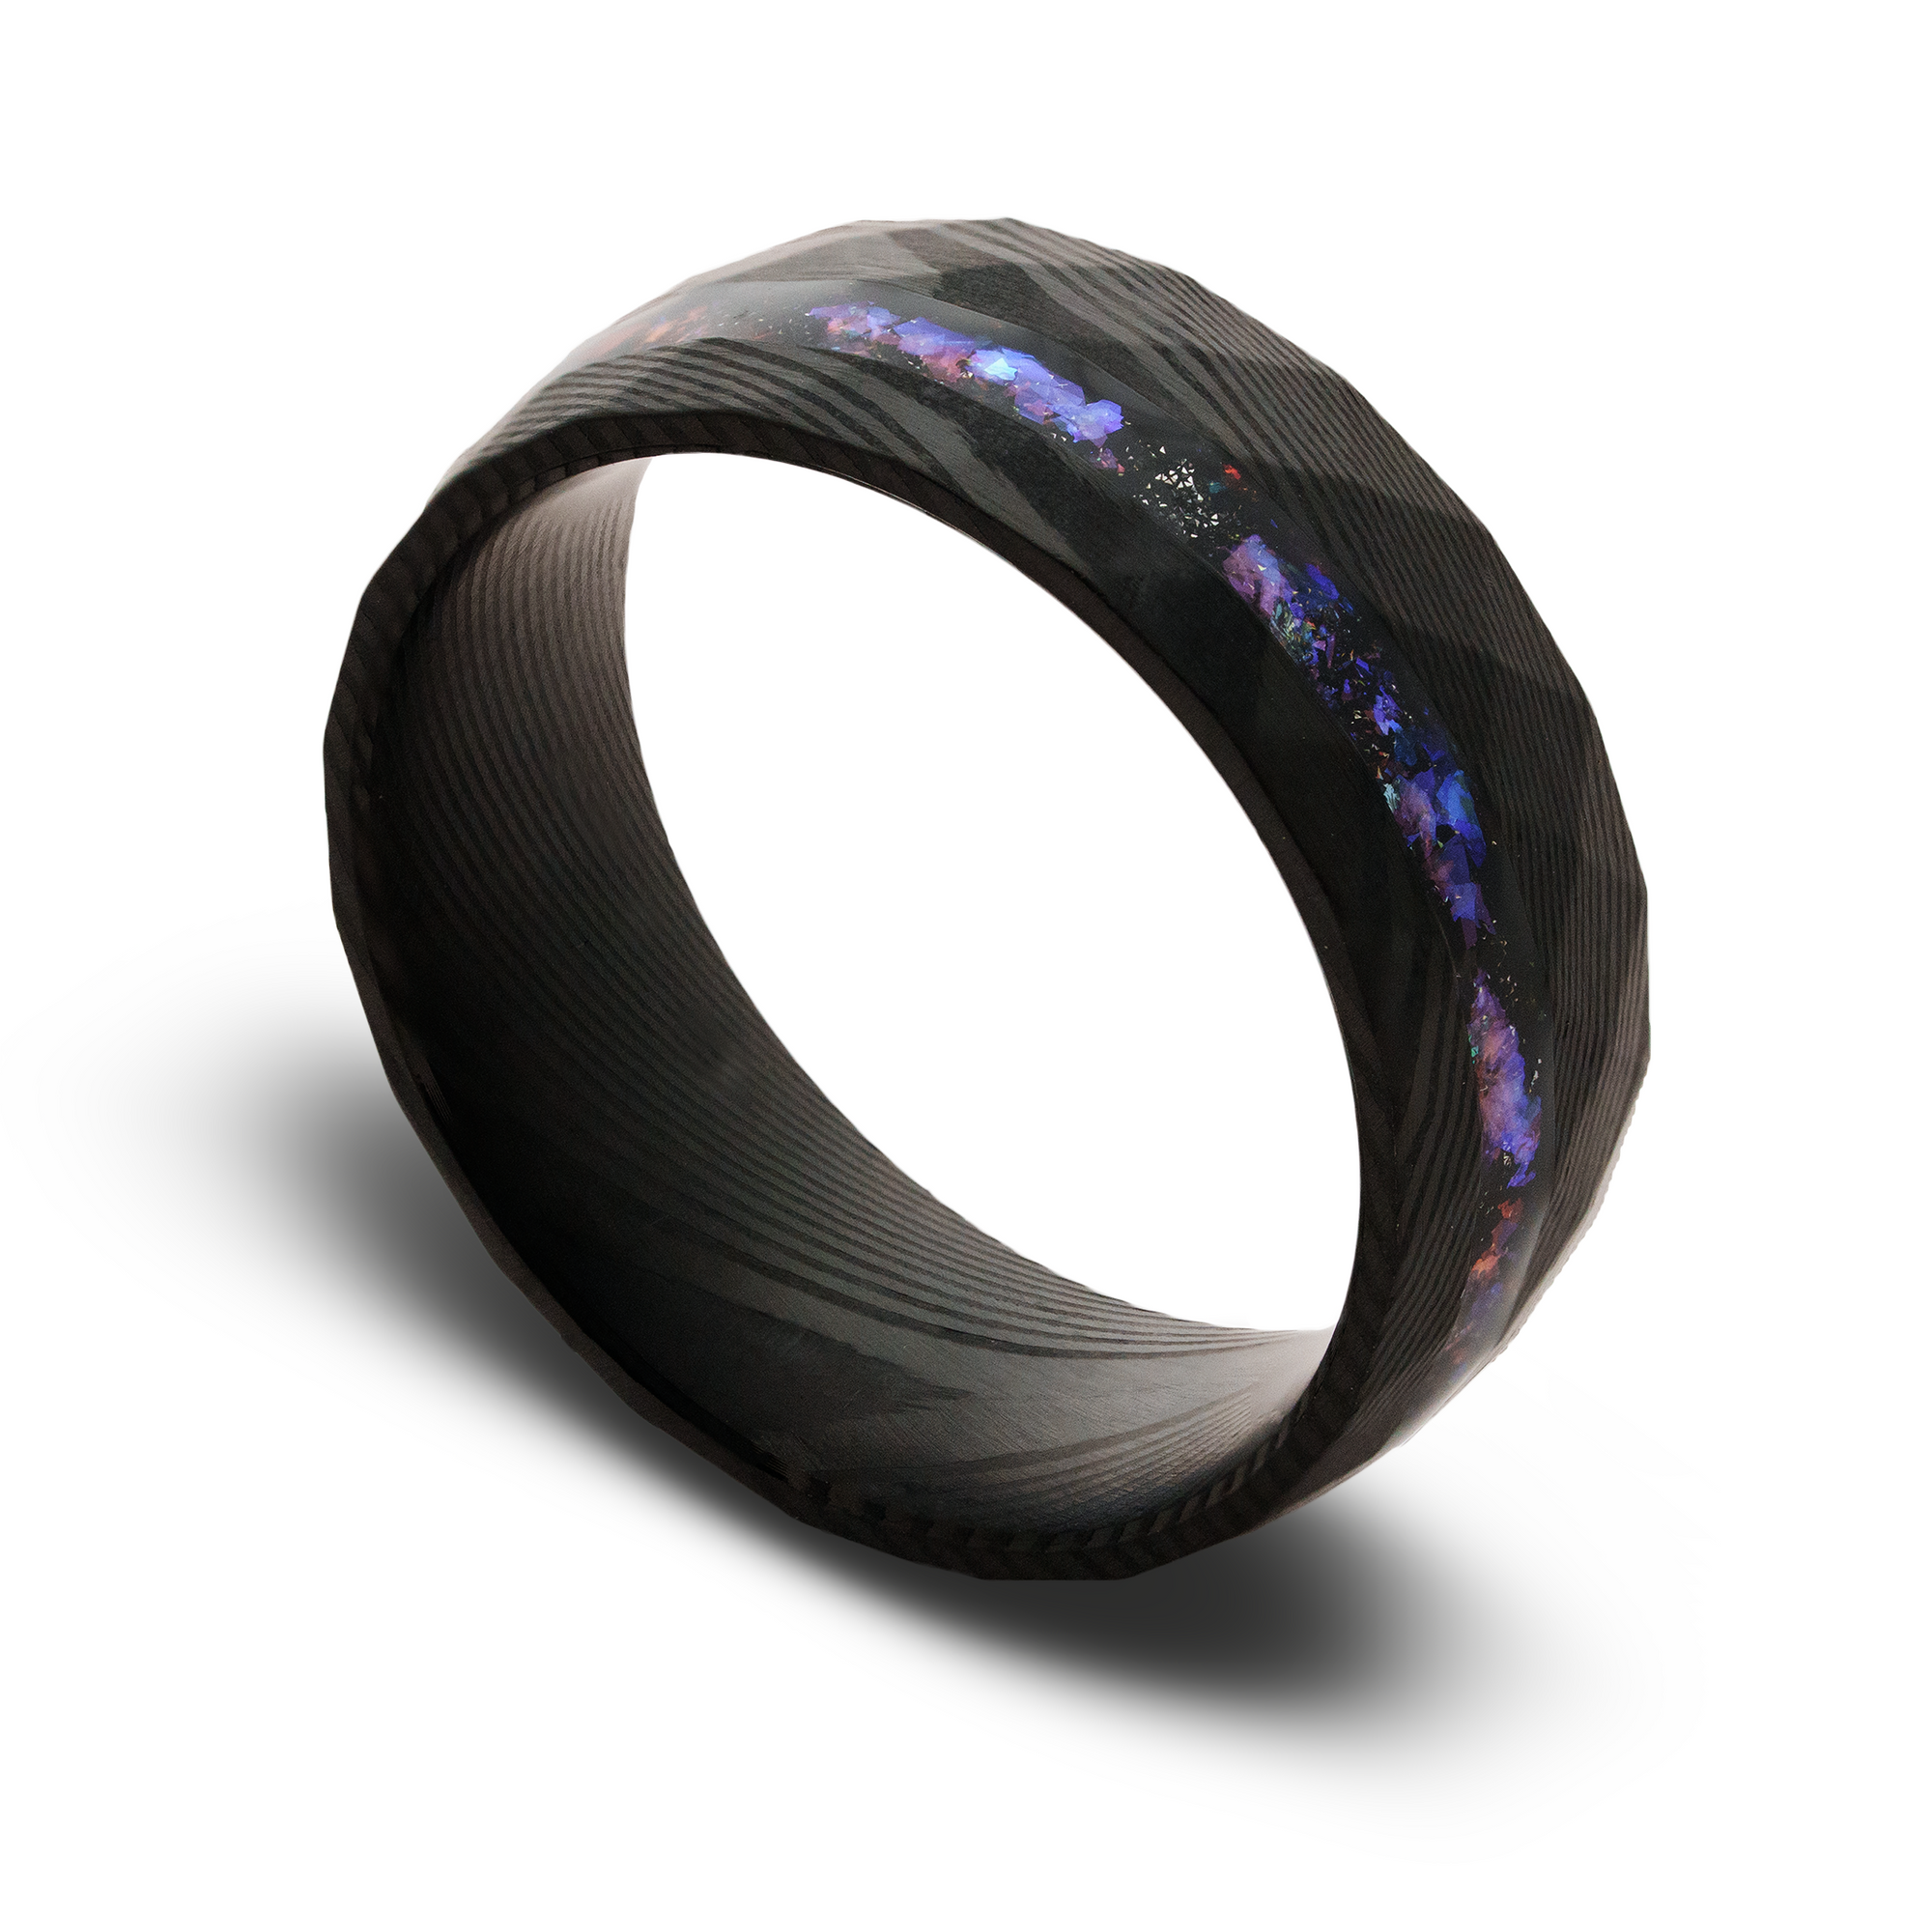 The “Enigma” Ring